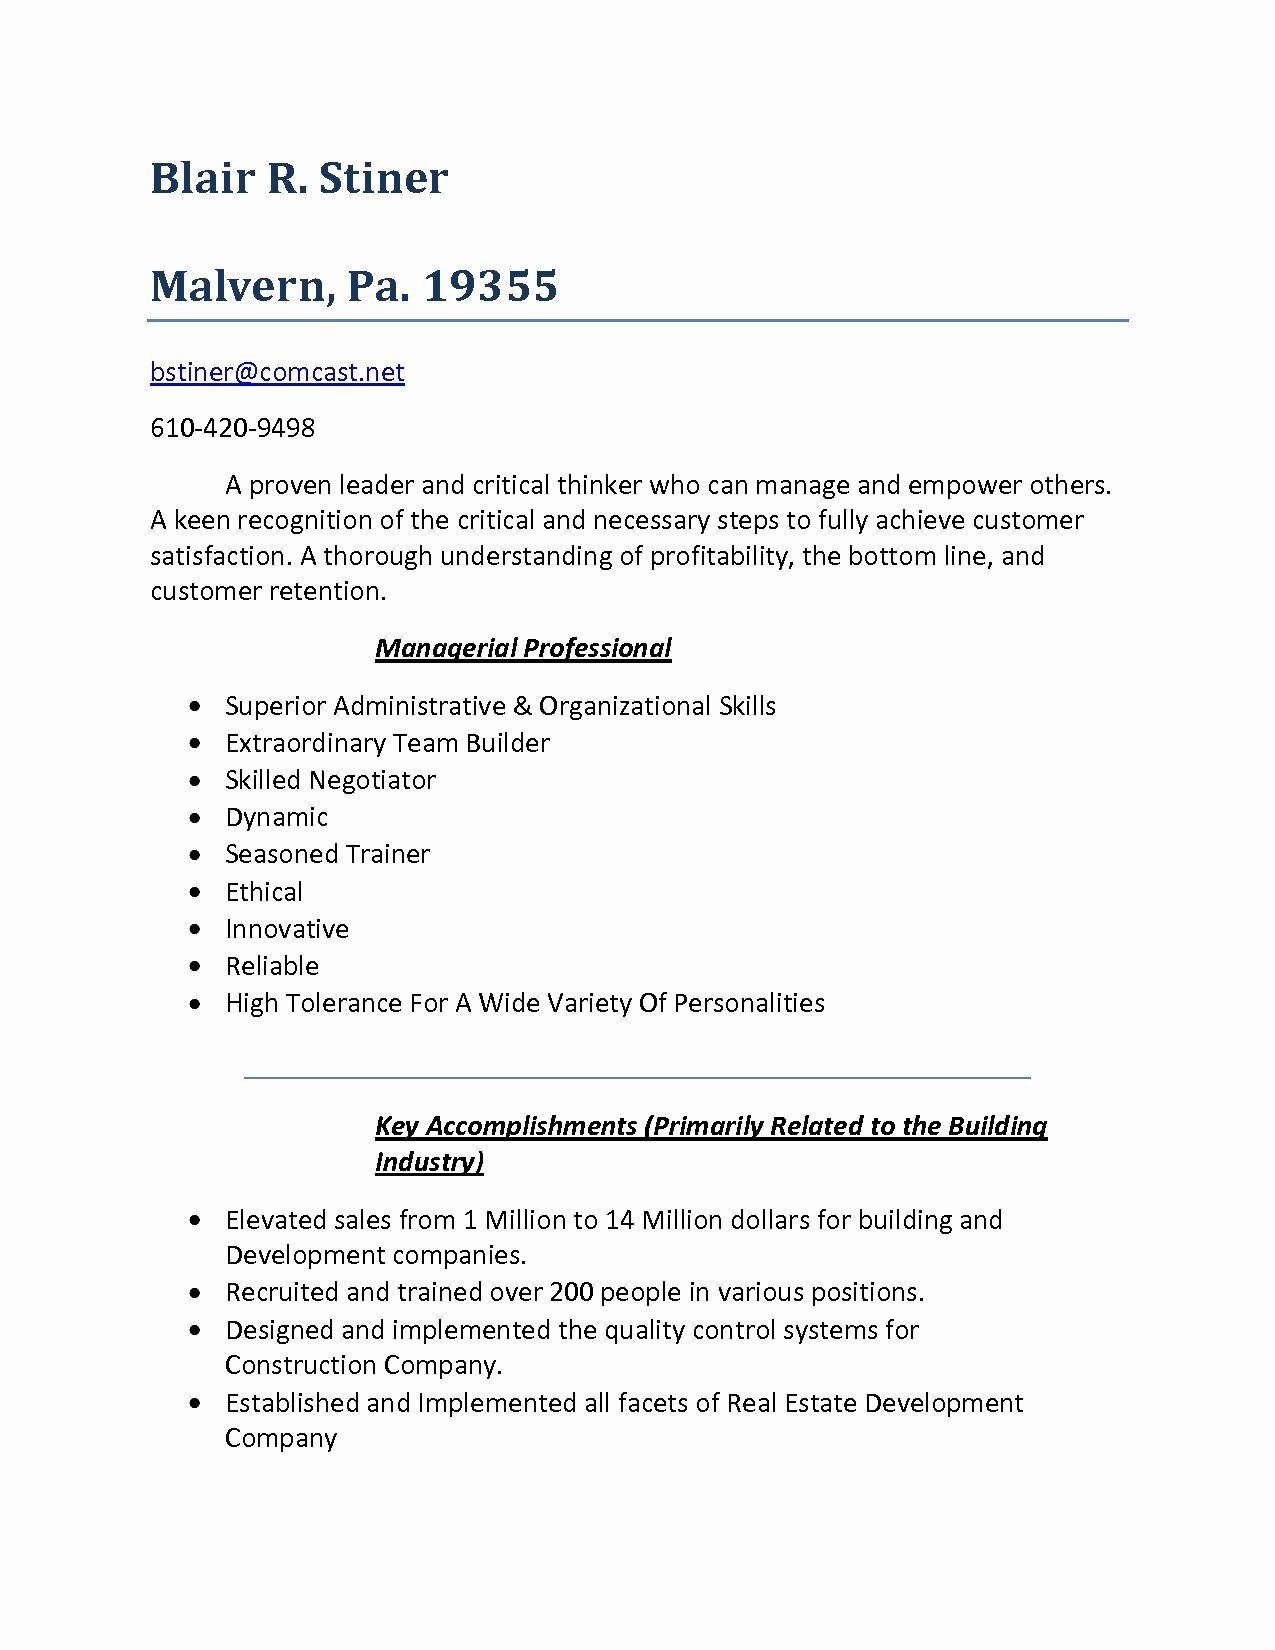 Pin On Top Resume Design Example 2020